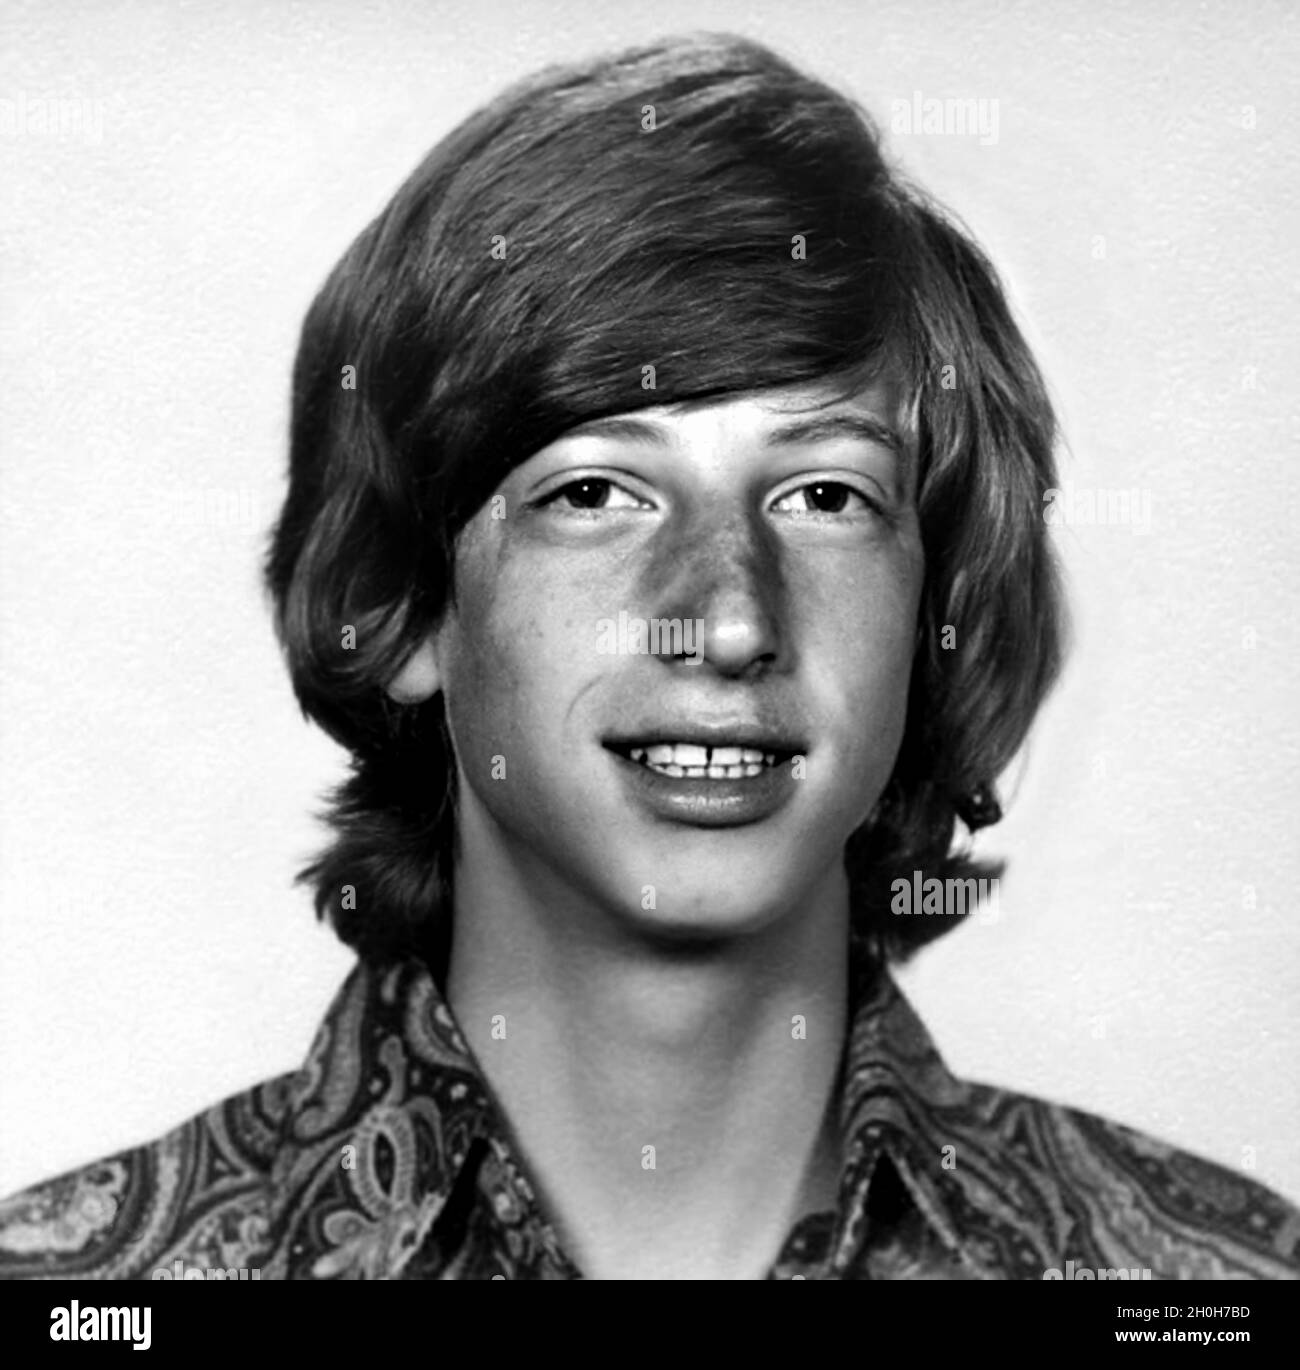 1972 ca, USA : The celebrated BILL GATES ( bo?rn in Seattle, 28 october 1955? ) when was a young boy aged 17  at High School . American business magnate , investor and media proprietor founder of WINDOWS MICROSOFT company . Unknown photographer .- INFORMATICA - INFORMATICO - INFORMATICS - COMPUTER TECHNOLOGY - INVENTORE - INVENTOR - HISTORY - FOTO STORICHE - TYCOON - personalità da bambino bambini da giovane - personality personalities when was young - INFANZIA - CHILDHOOD - TEENAGER - RAGAZZO --- ARCHIVIO GBB Stock Photo